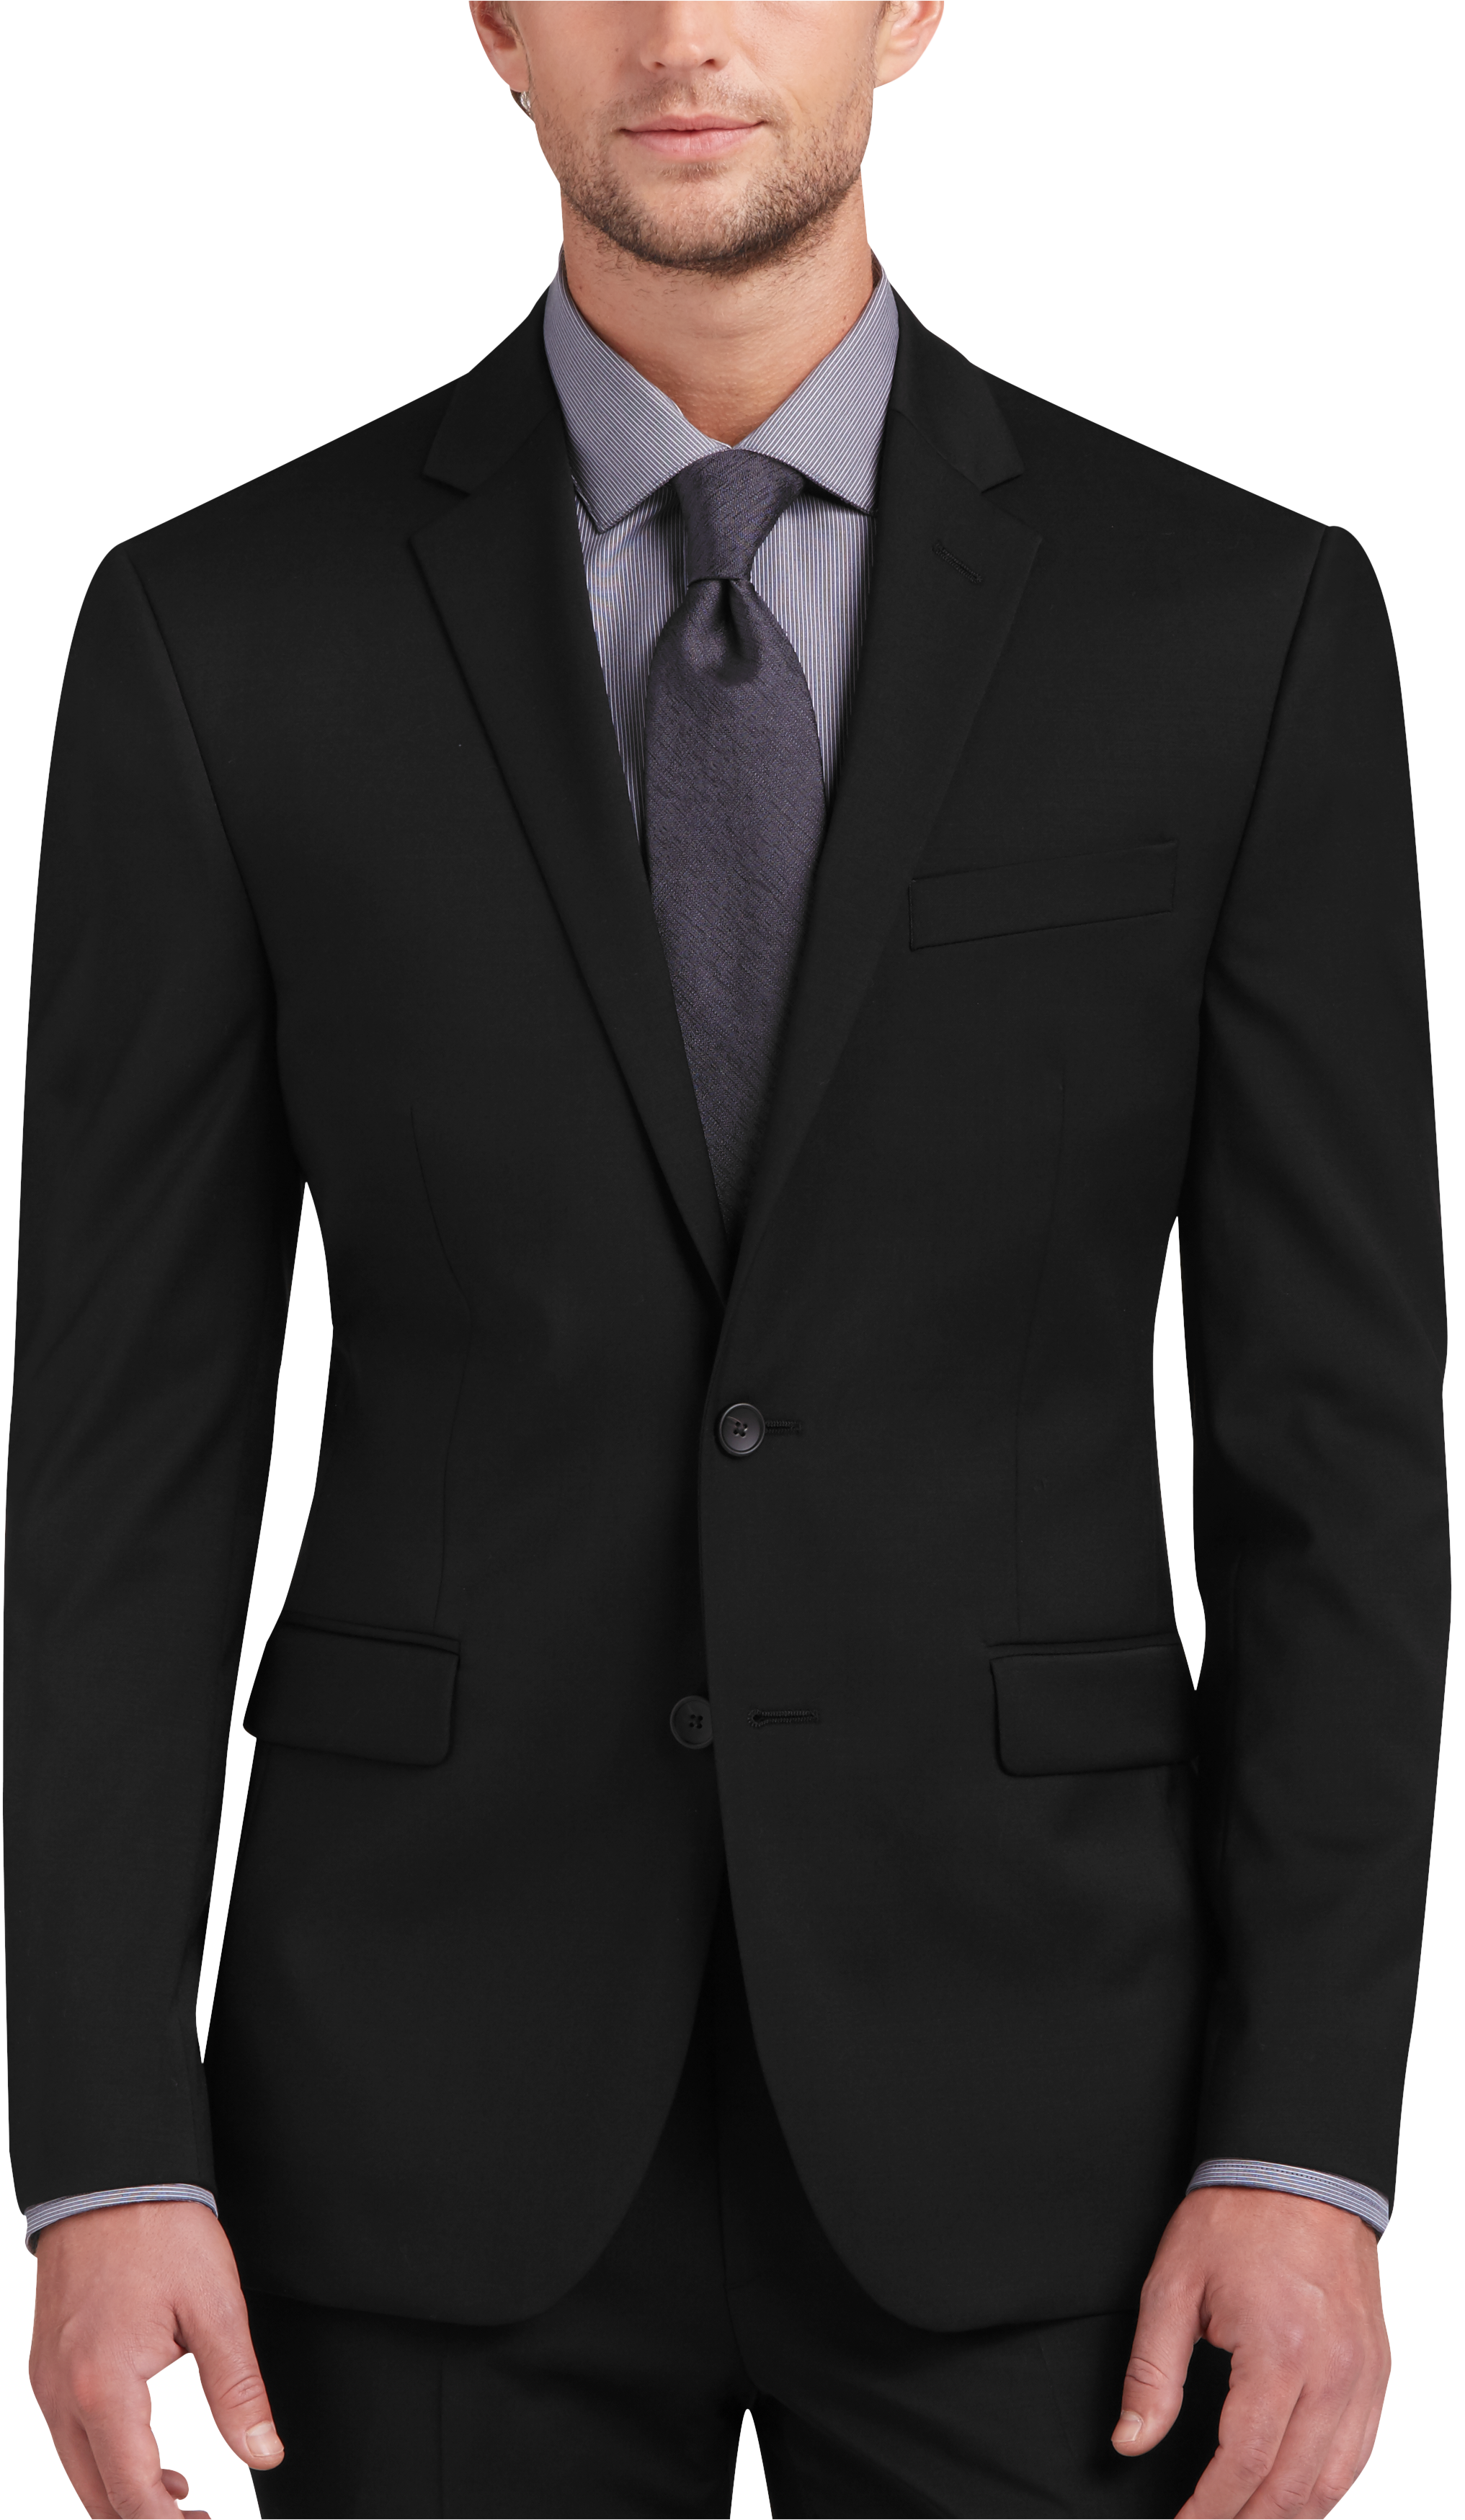 Awearness Kenneth Cole AWEAR-TECH Black Extreme Slim Fit Suit Separates ...